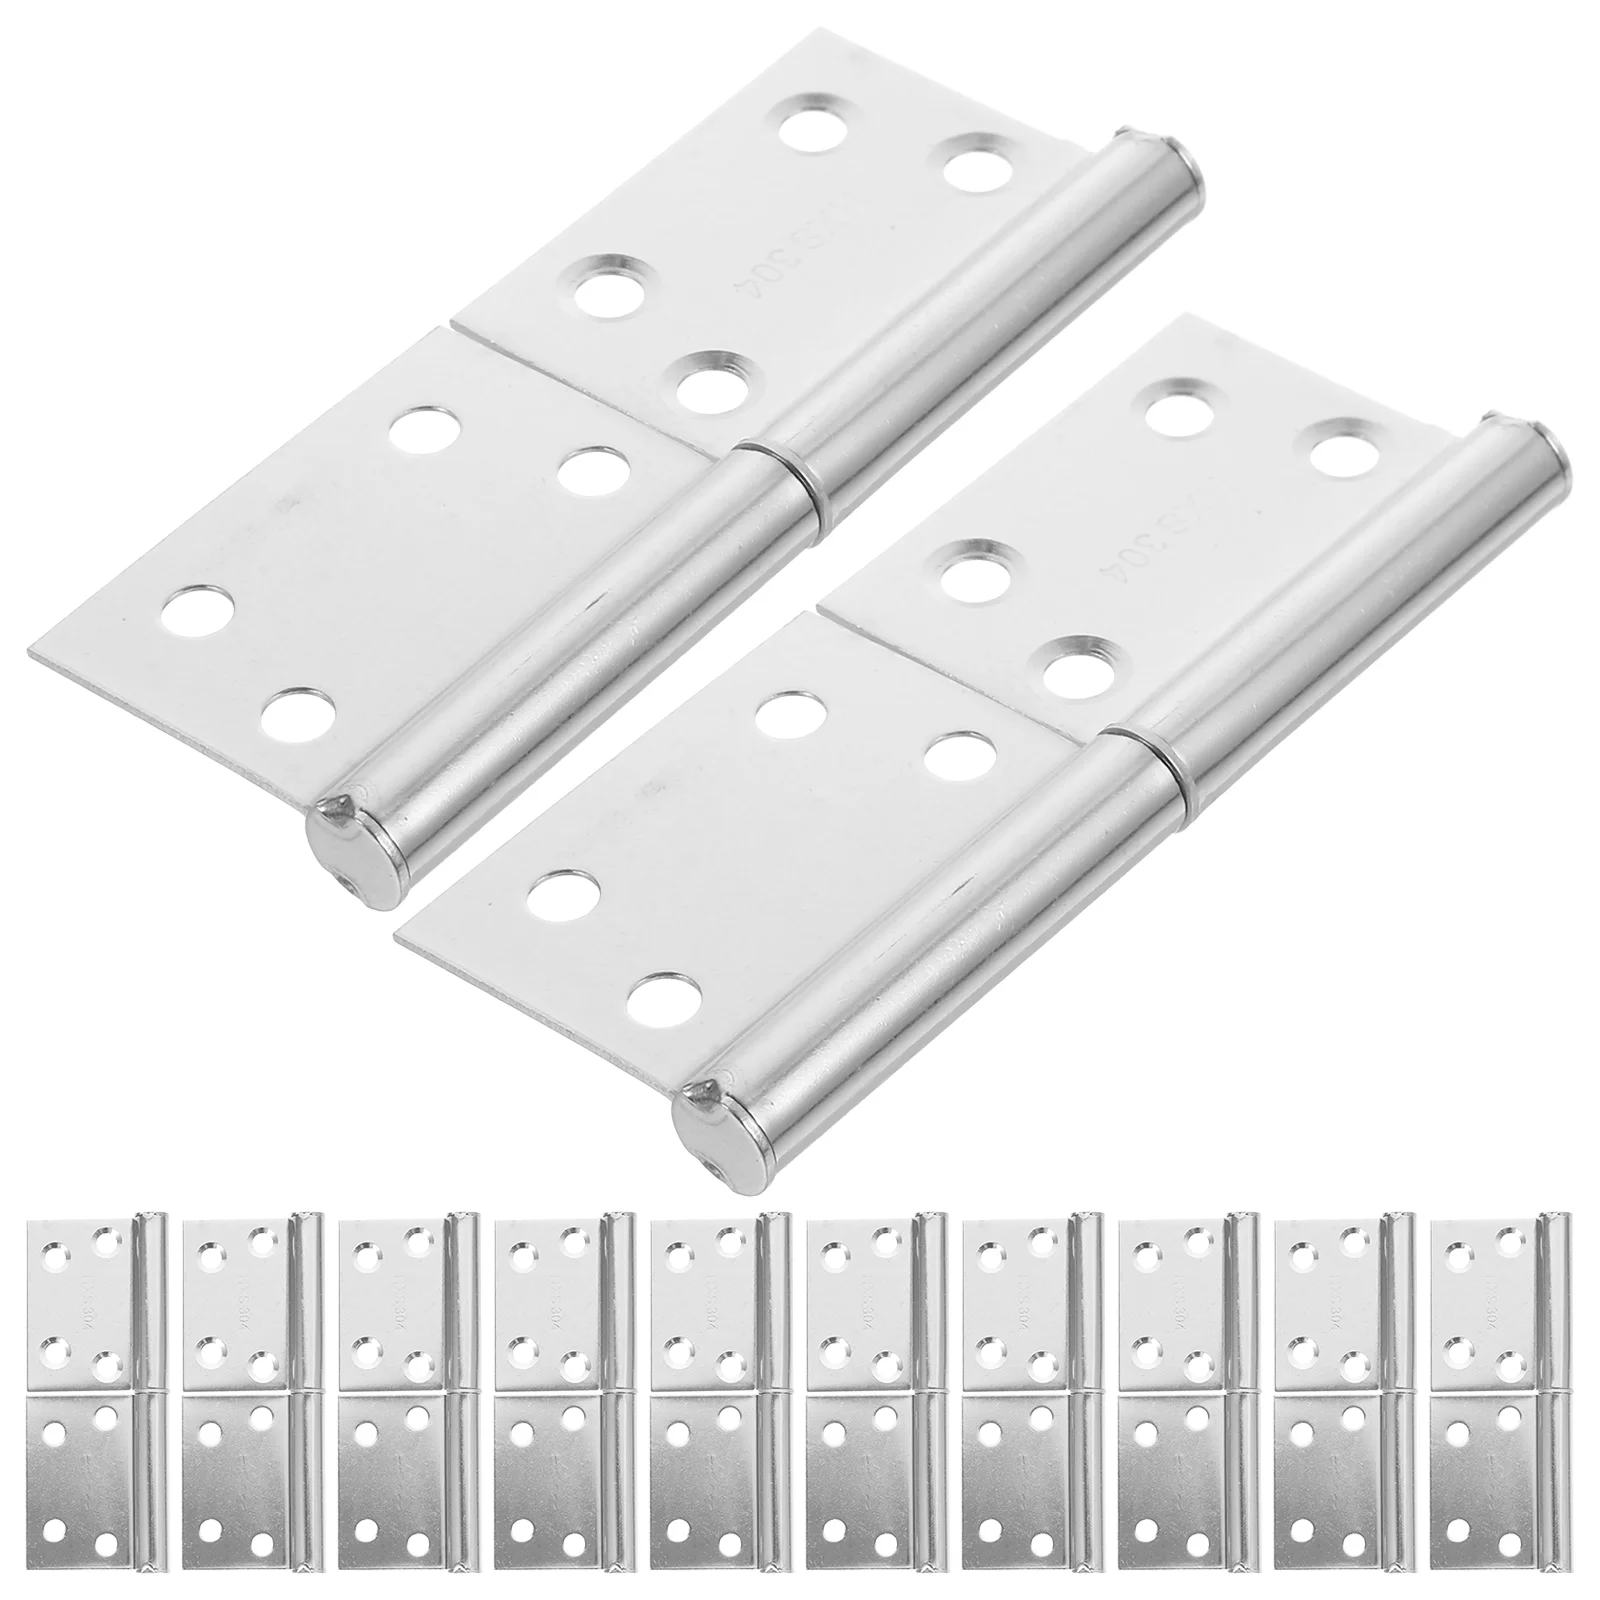 

6 Pairs Lift Hinges Door Installation Kit Heavy Duty Small Interior Stainless Steel Outdoor